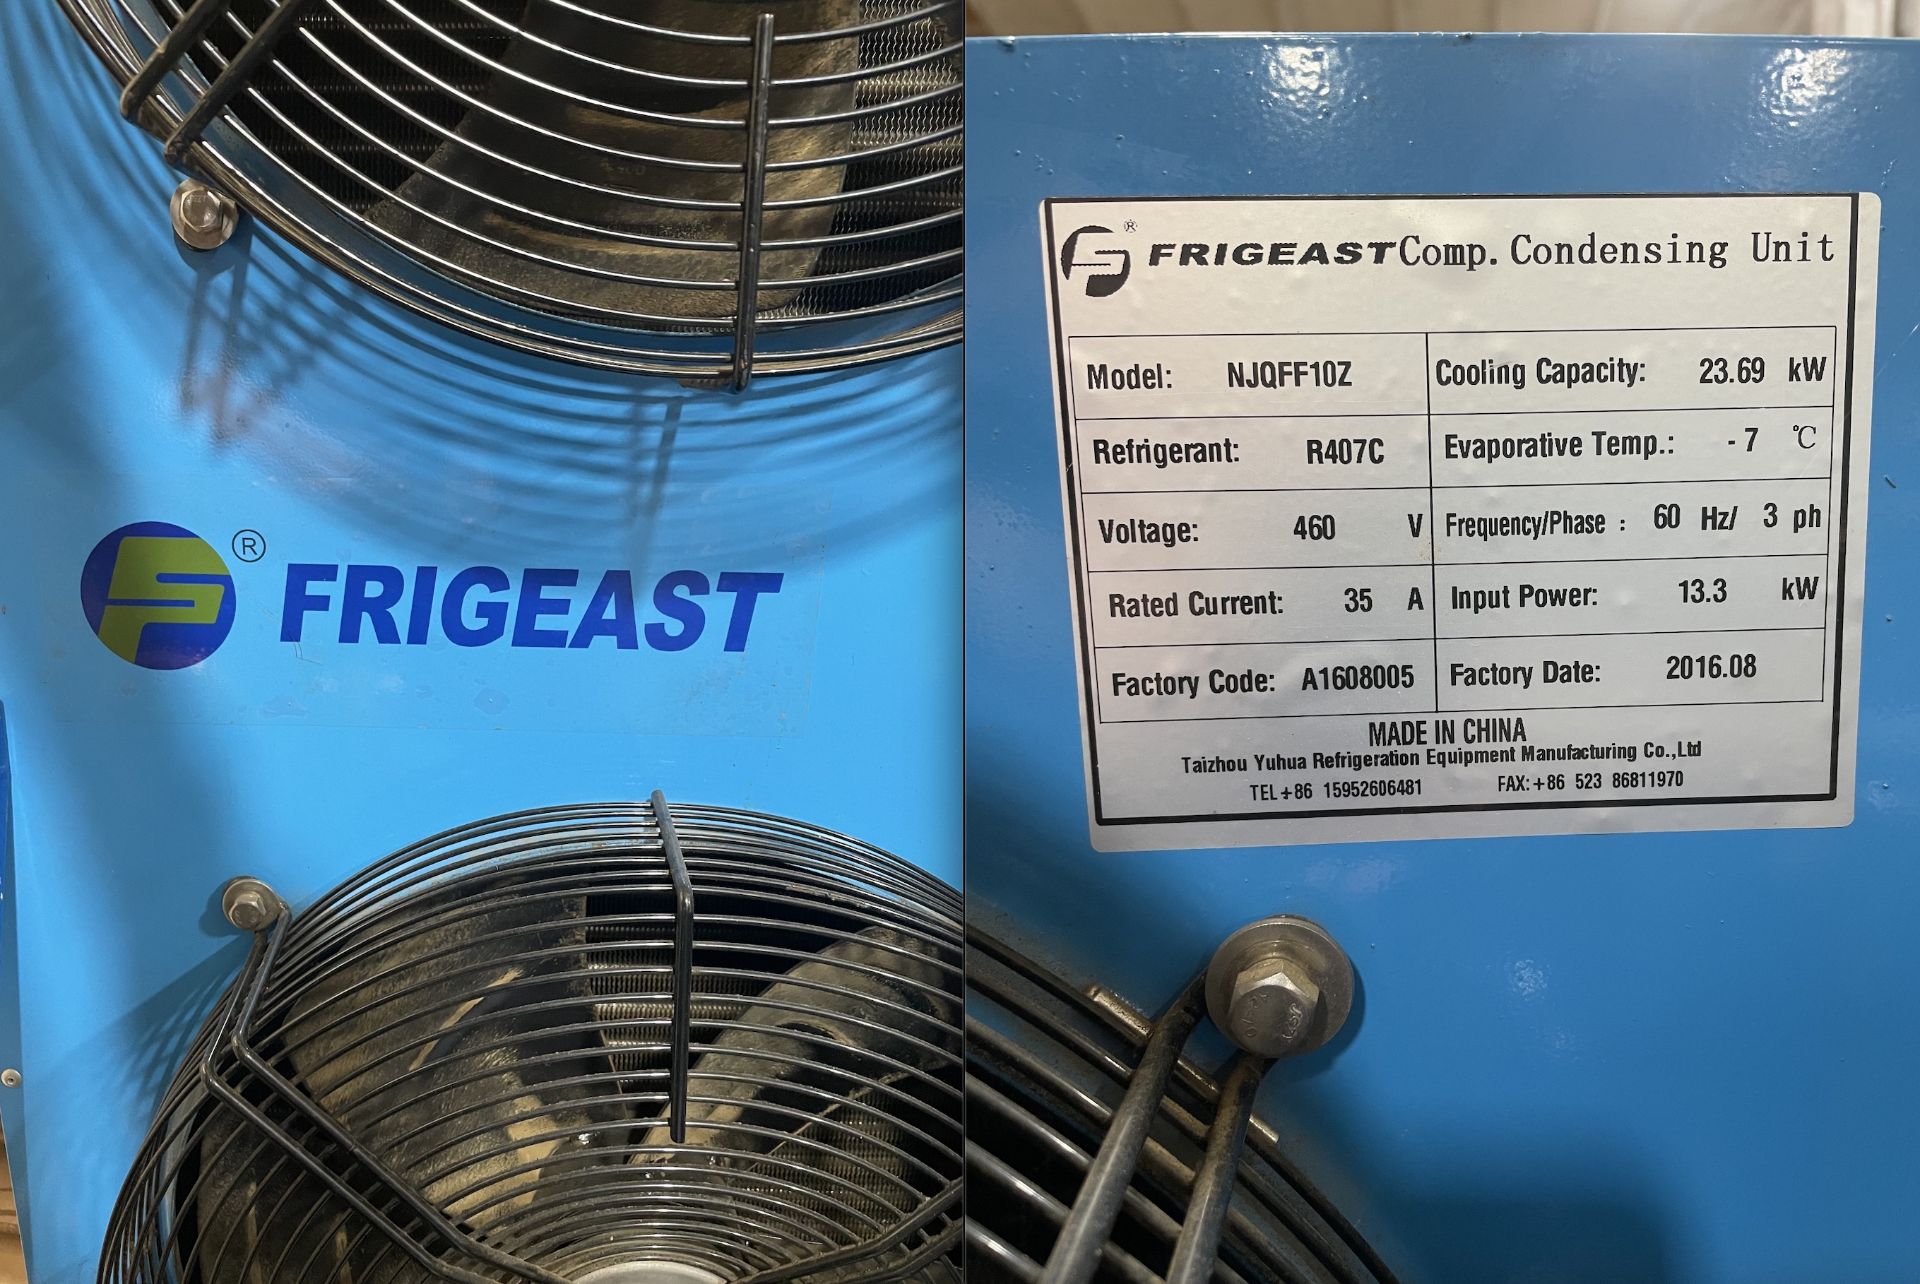 New/ Still-In-Crate Frigeast Condensing Unit for Chilling System. Model NJQFF10Z.